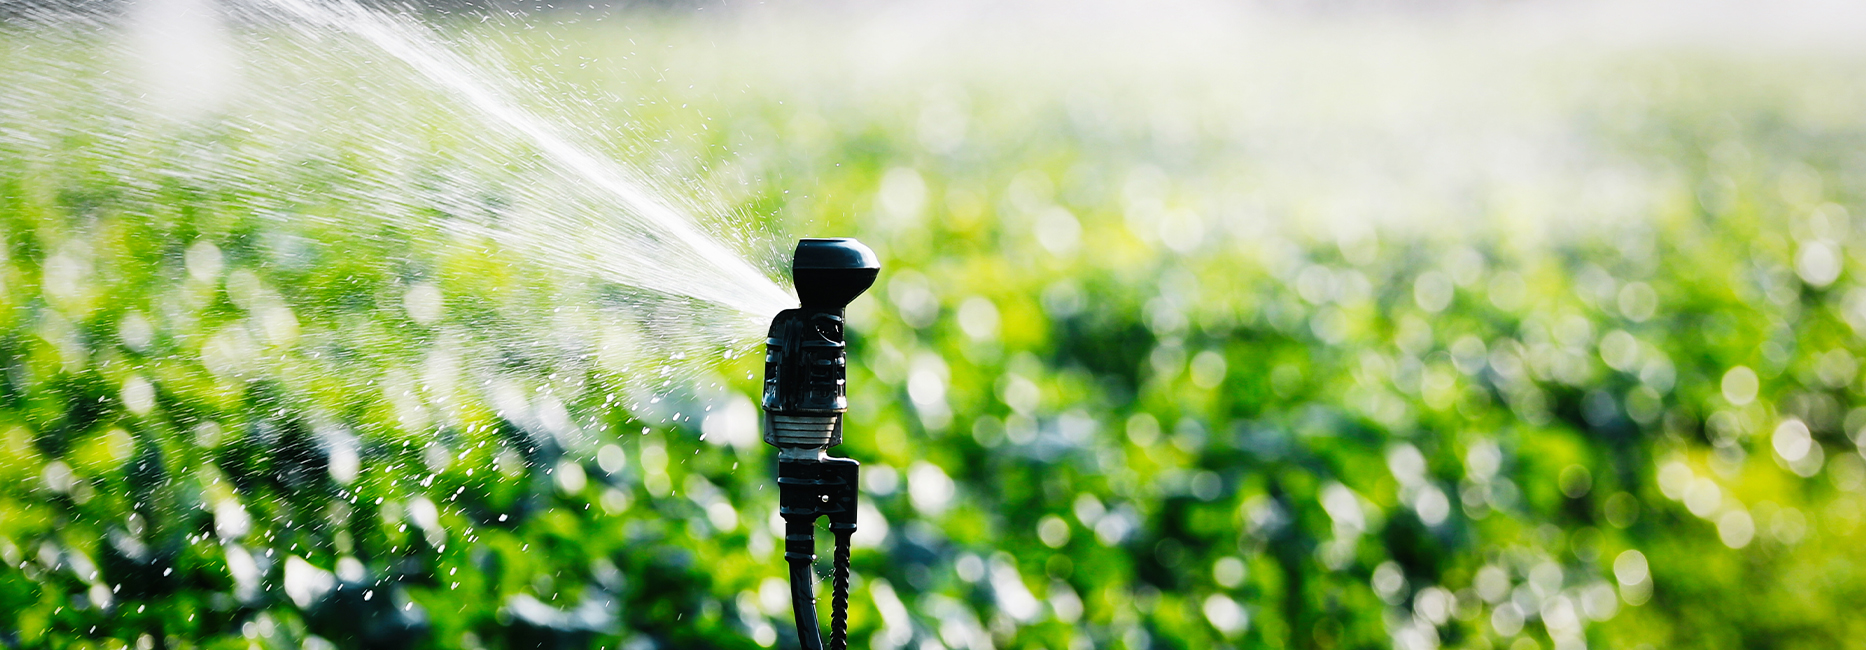 irrigation image feature